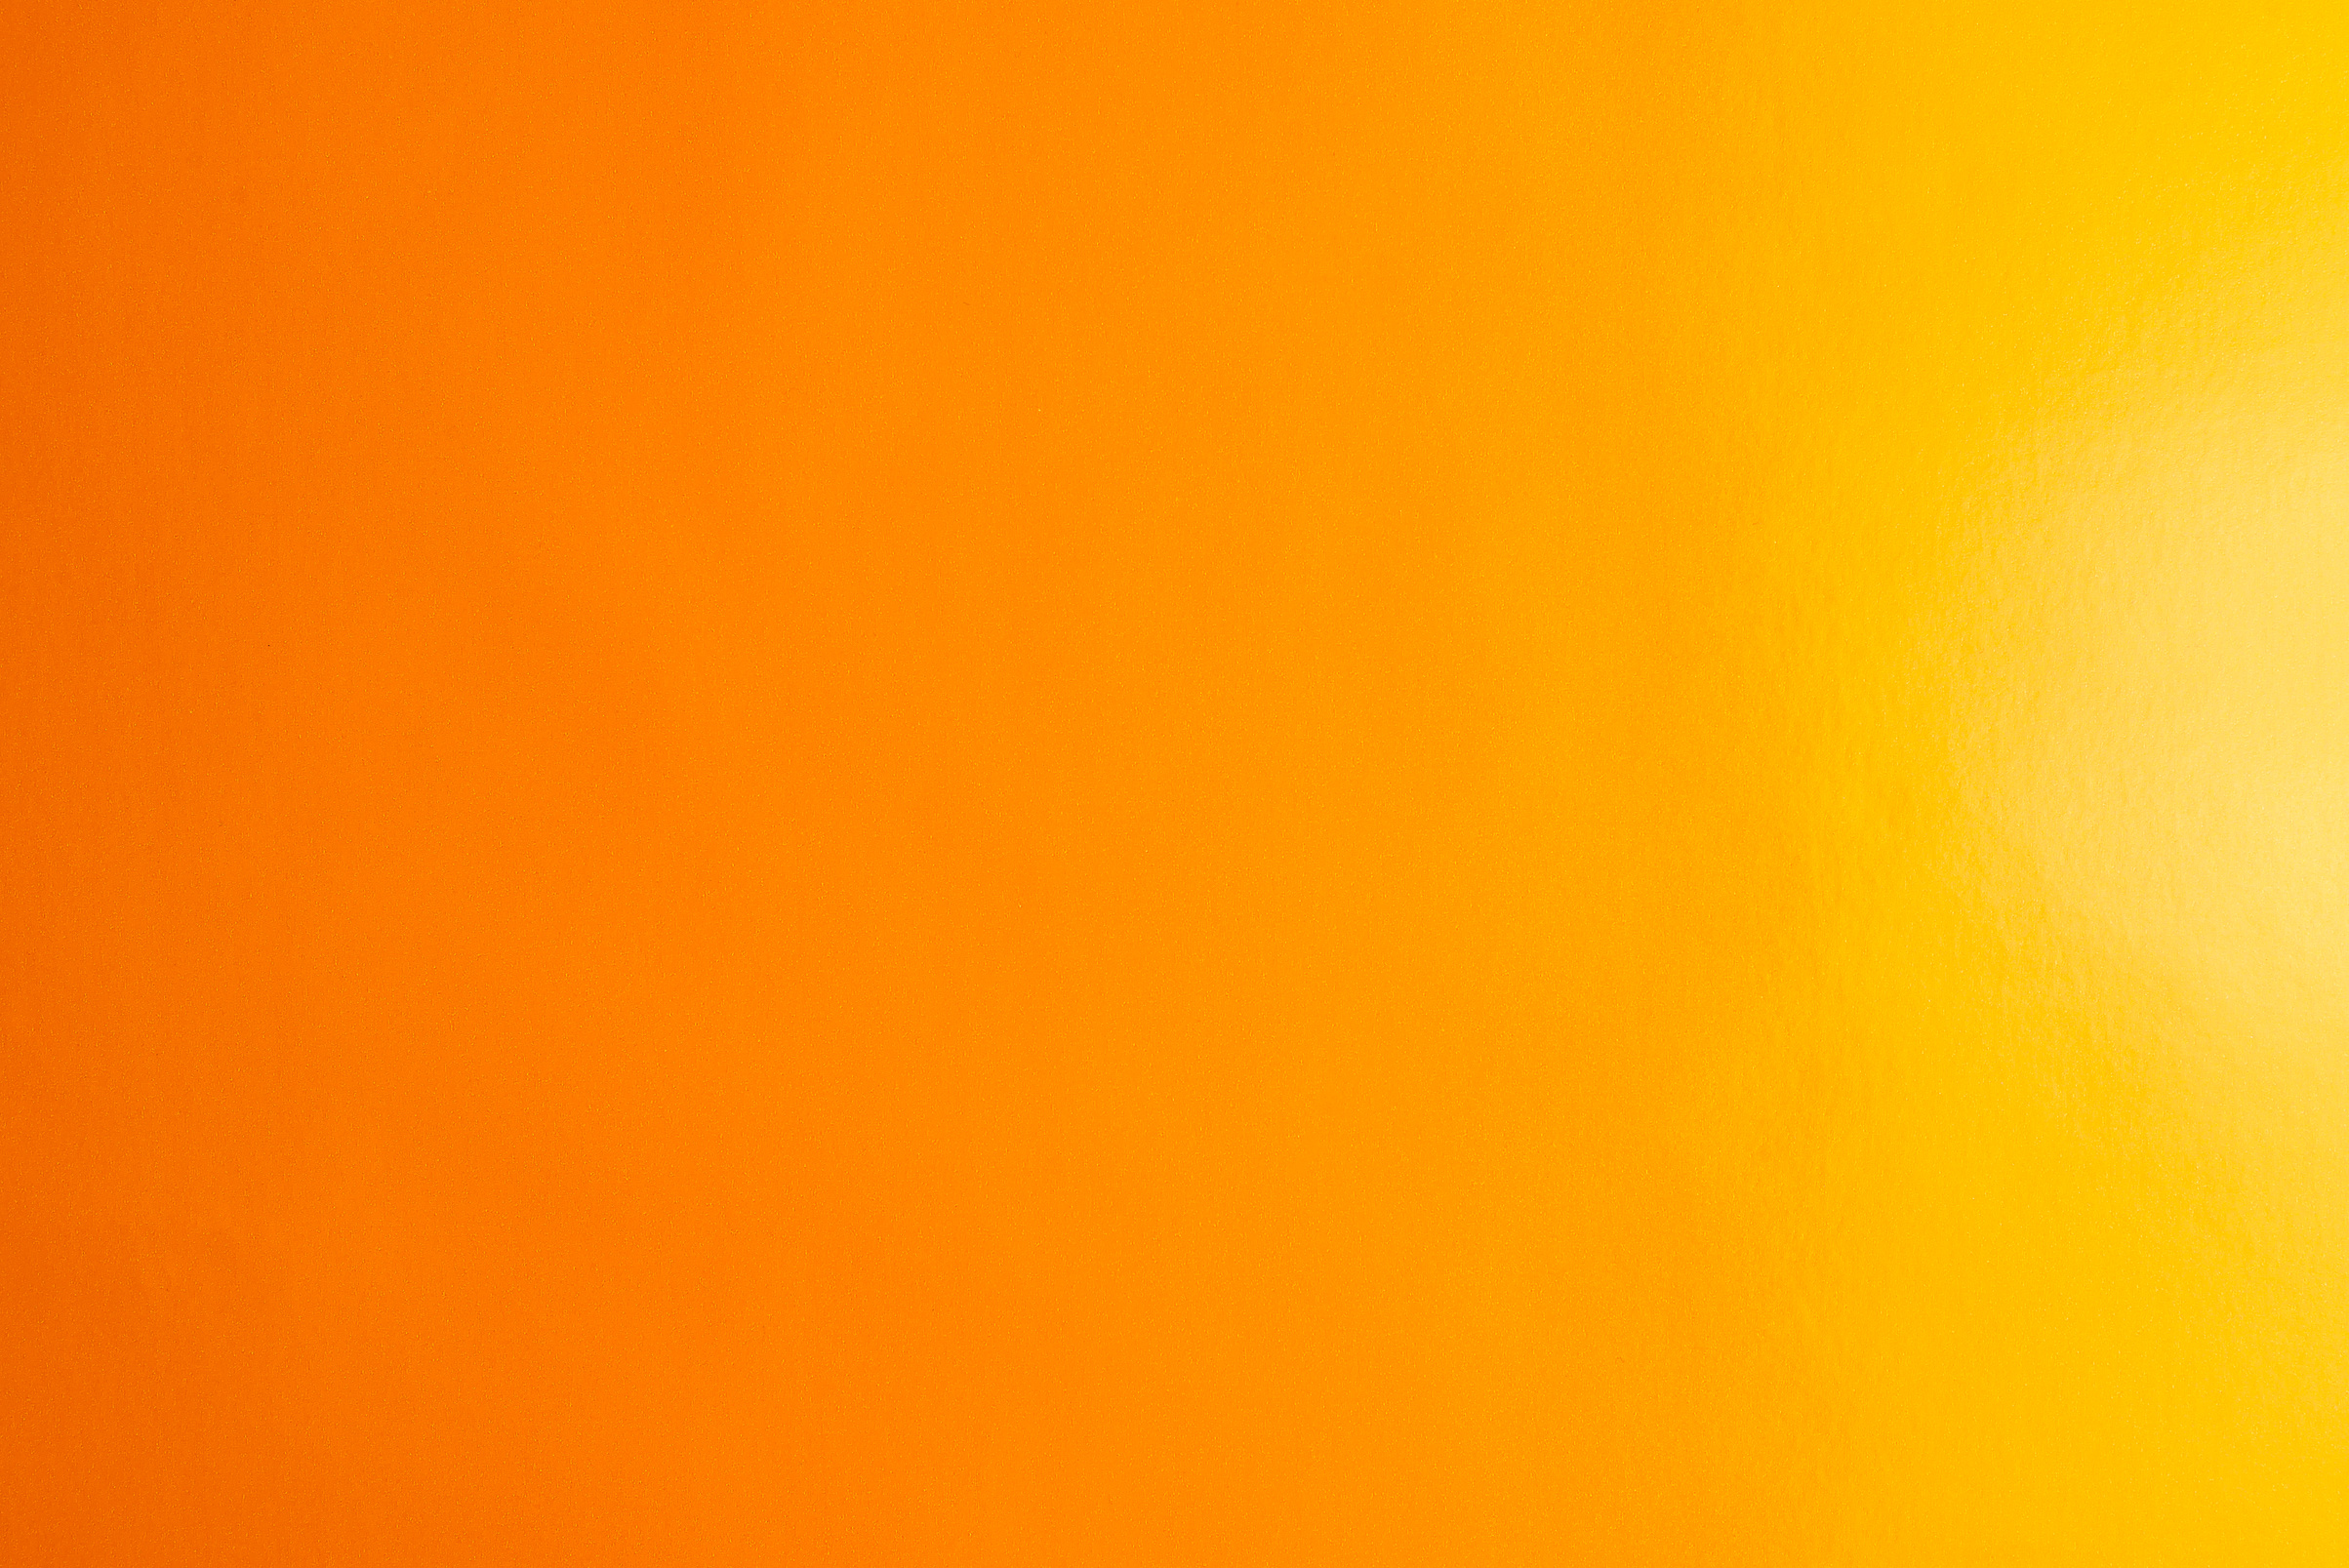 Orange background made of real colored paper, illuminated by a soft light from the right.